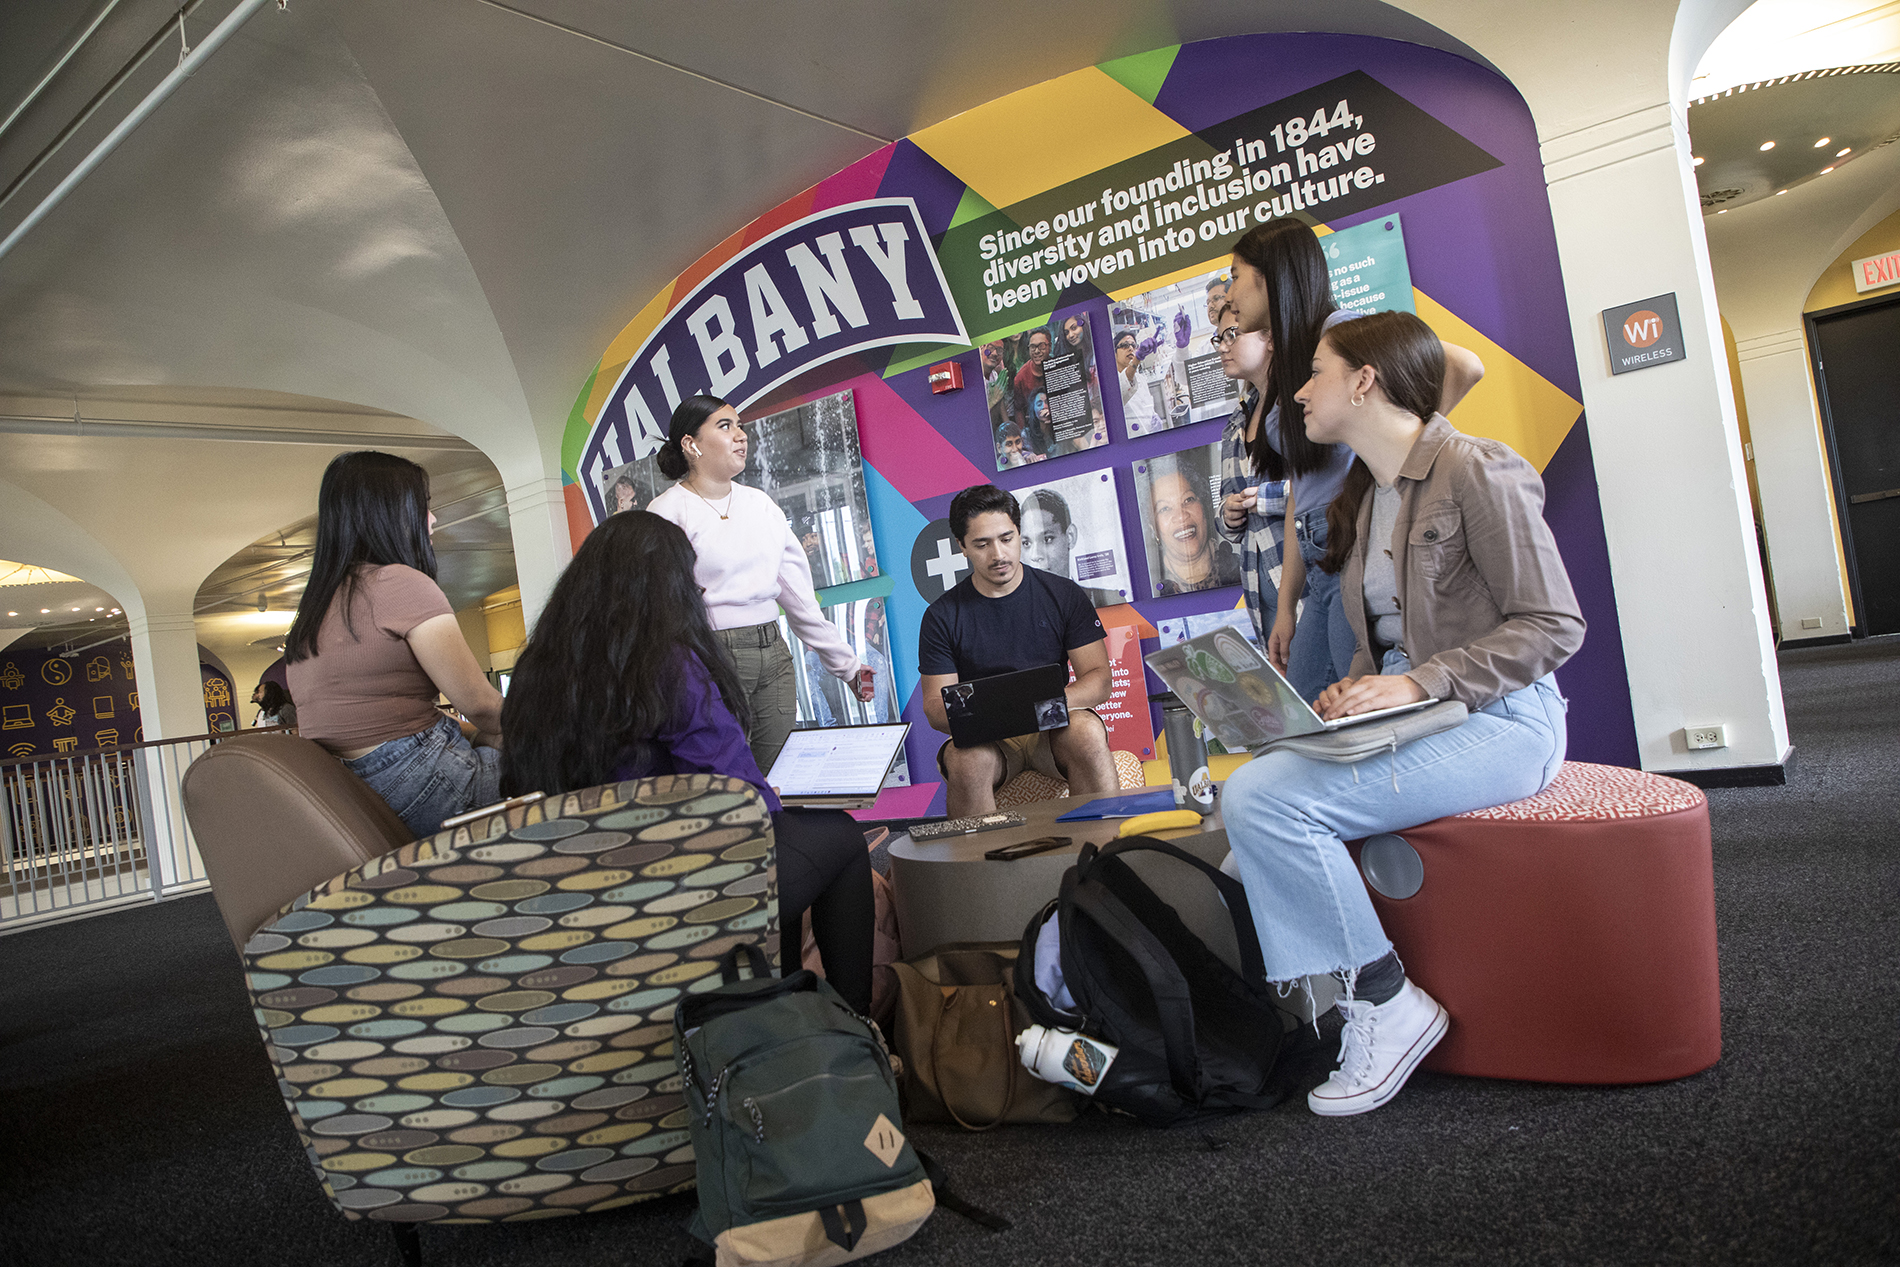 UAlbany students working together in campus center